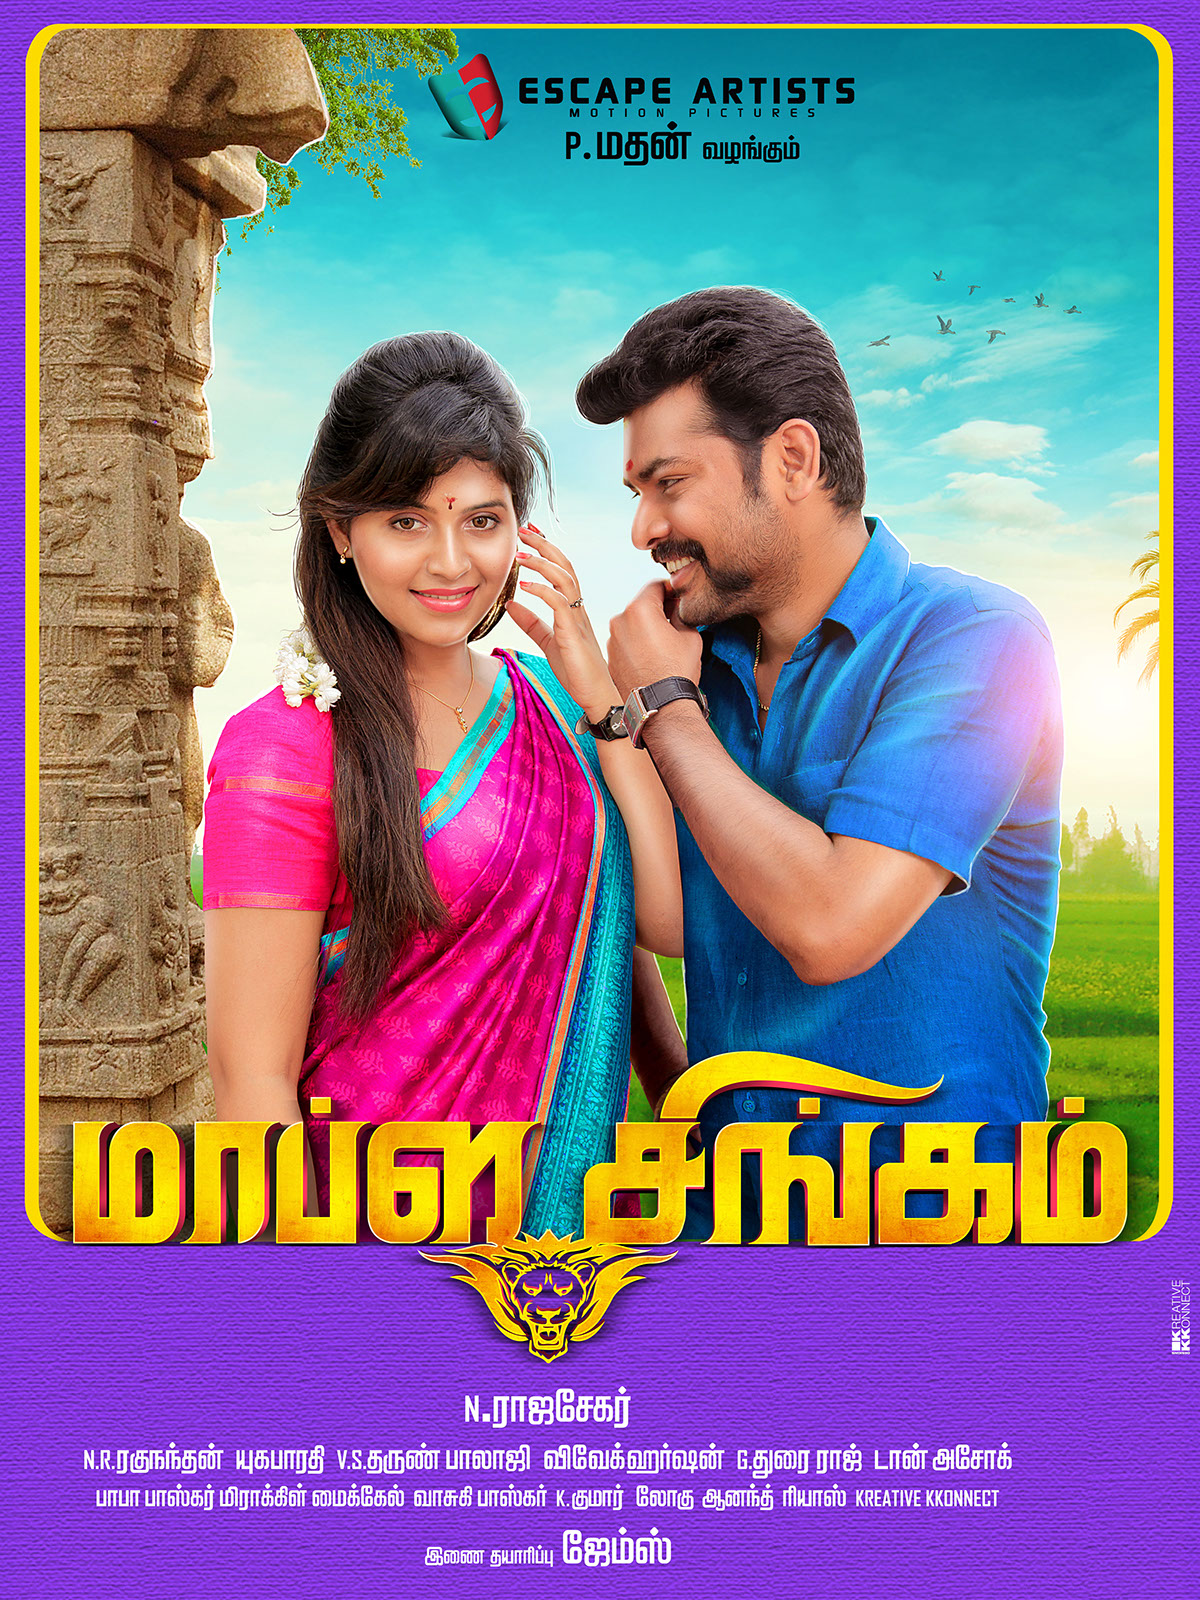 Mapla singam - Tamil Movie posters on Behance